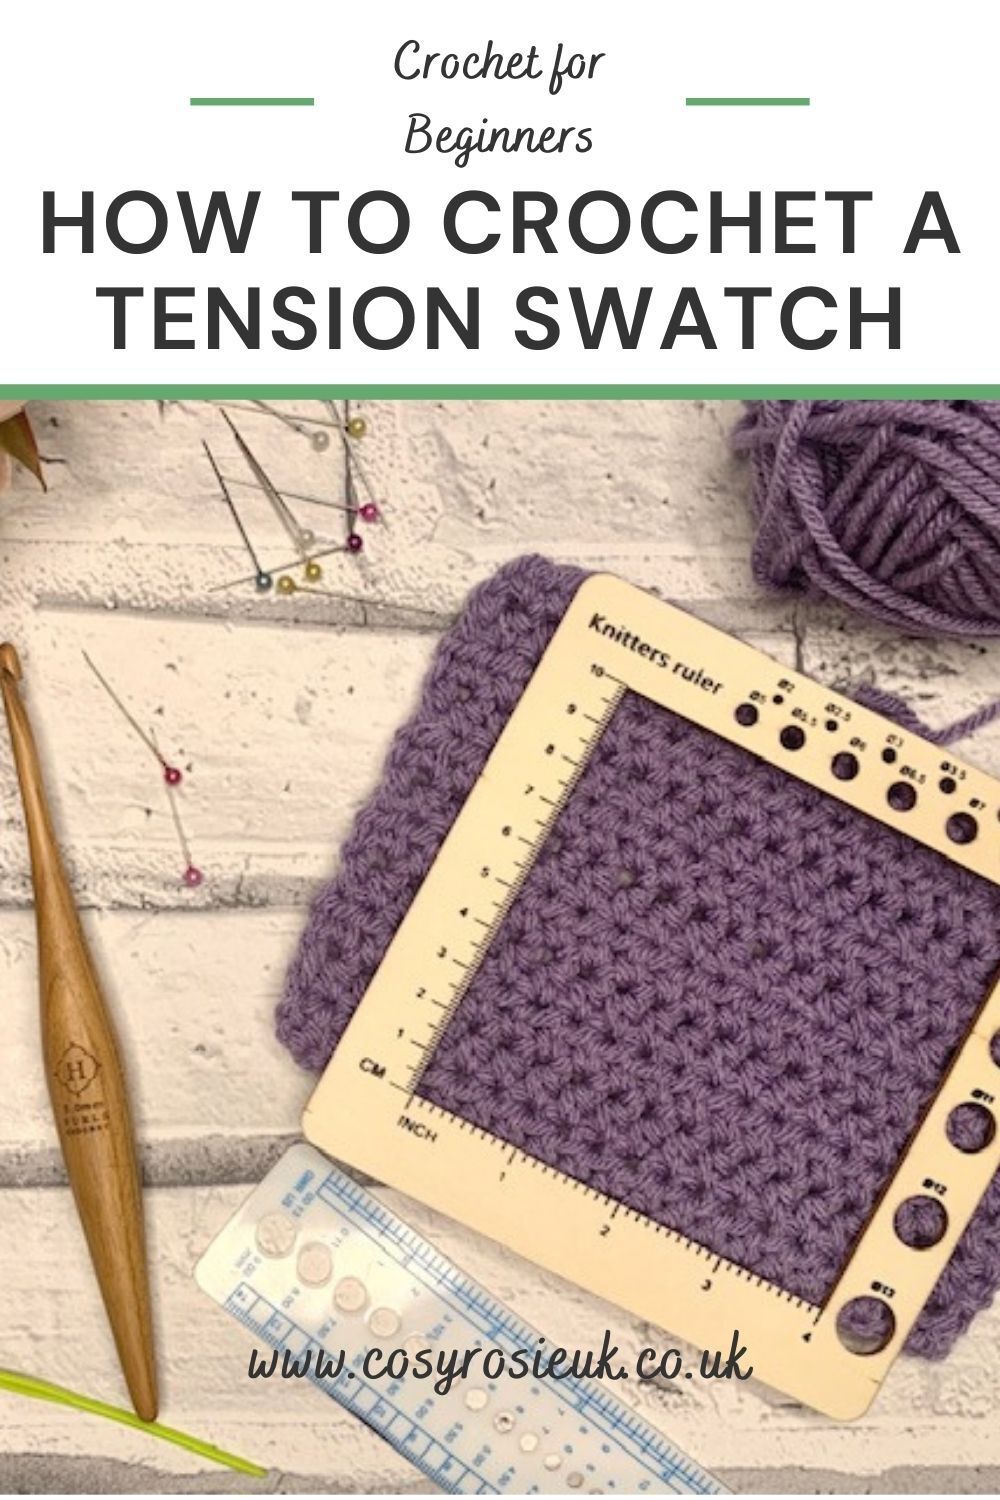 How to measure a tension swatch